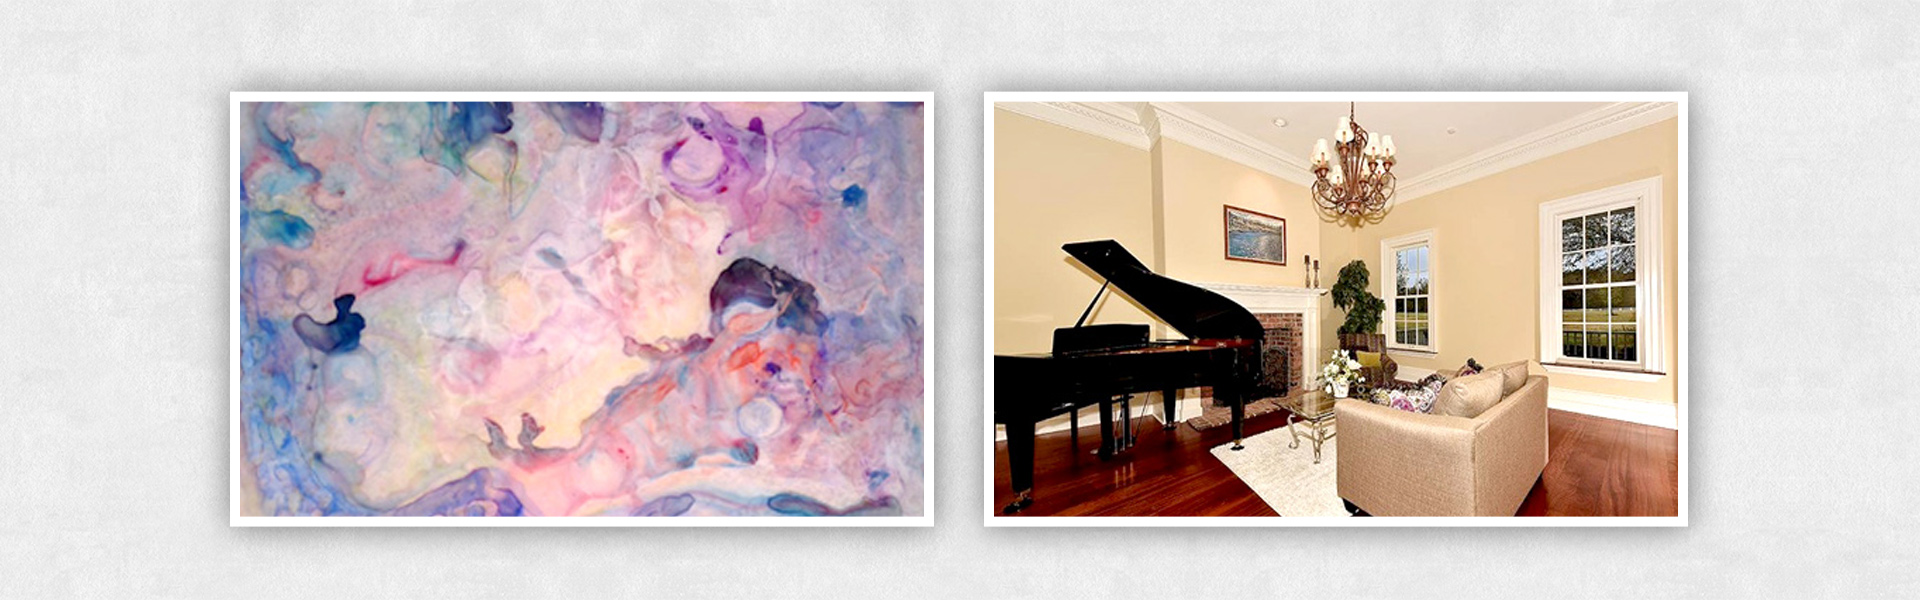 Abstract Painting and a Piano